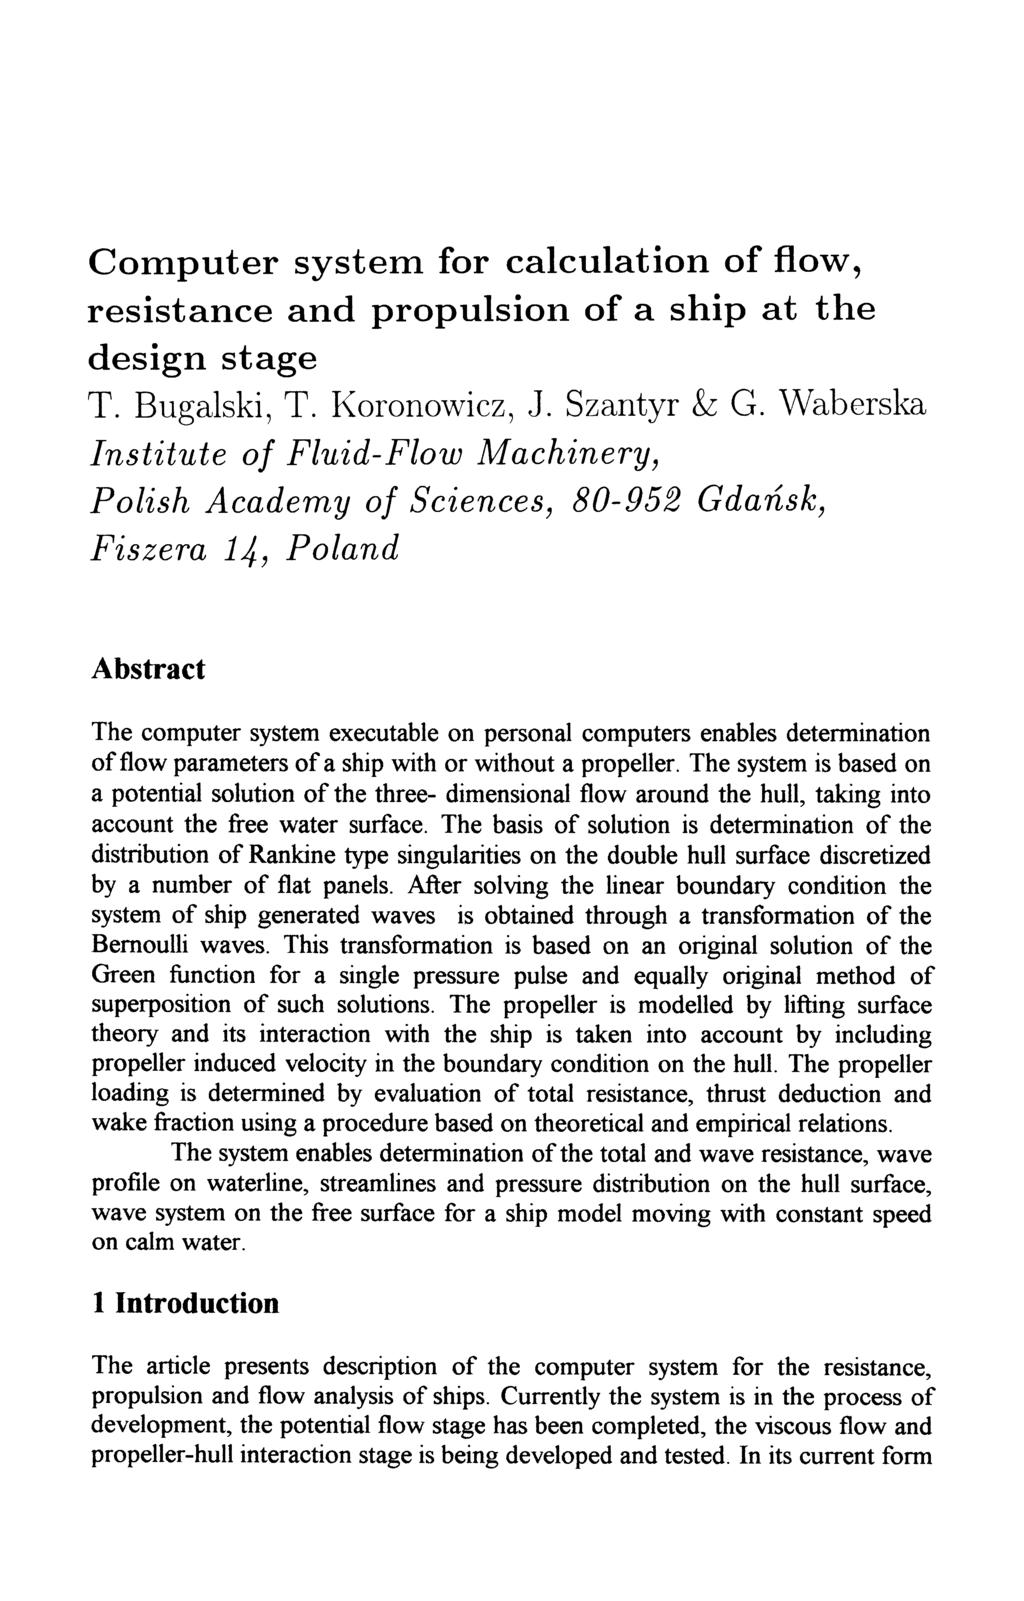 Computer system for calculation of flow, resistance and propulsion of a ship at the design stage T. Bugalski, T. Koronowicz, J. Szantyr & G.